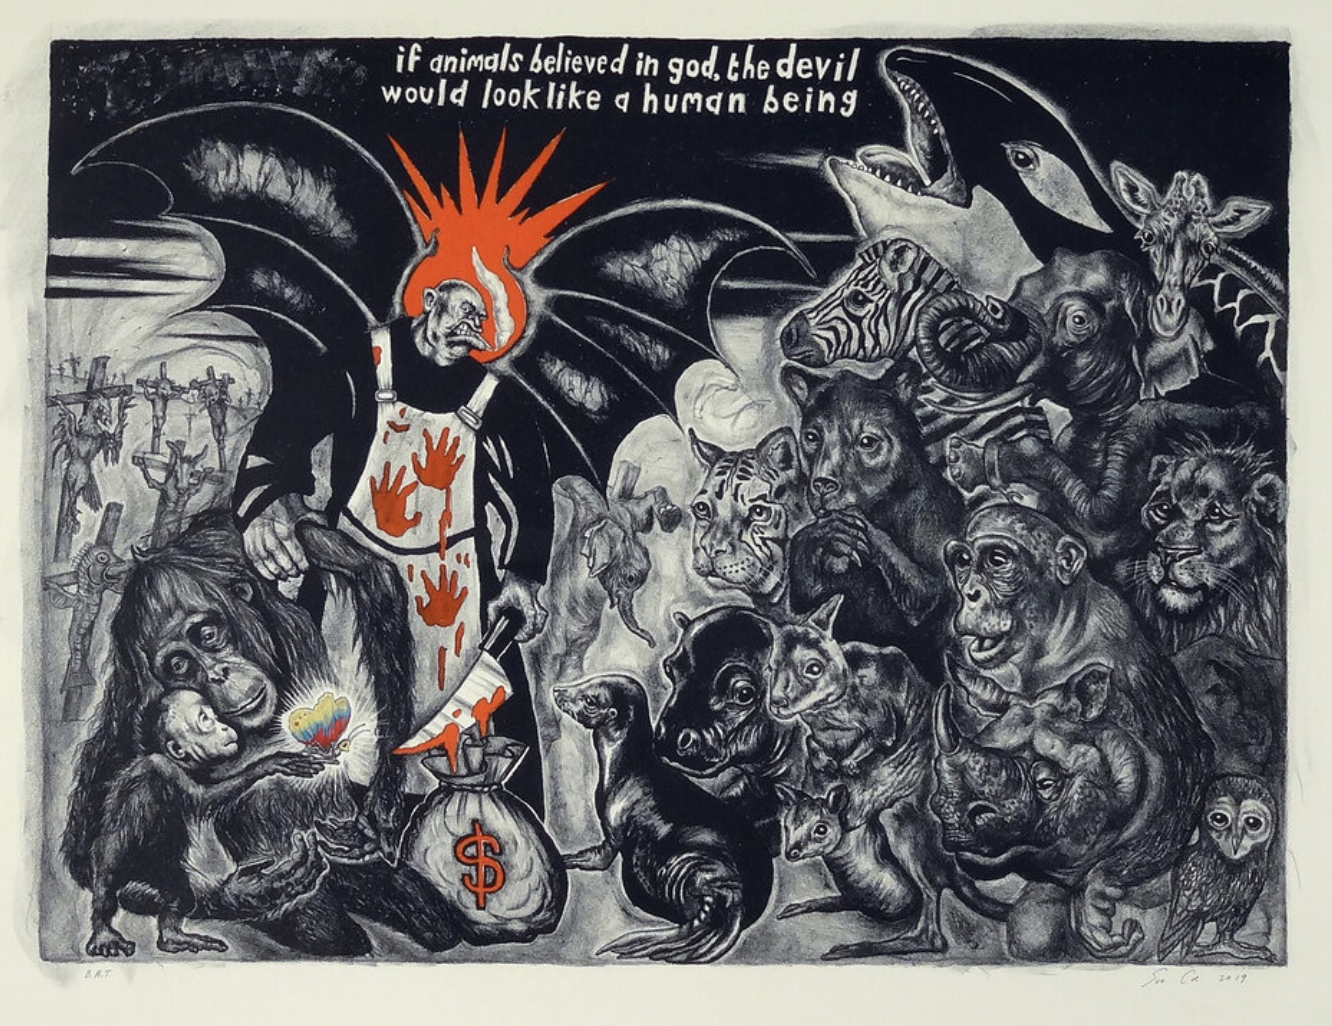 artwork by sue coe "if anminals believed in god the devil would look like a human being" depicting a group of various animals gathered around a human figure with wings